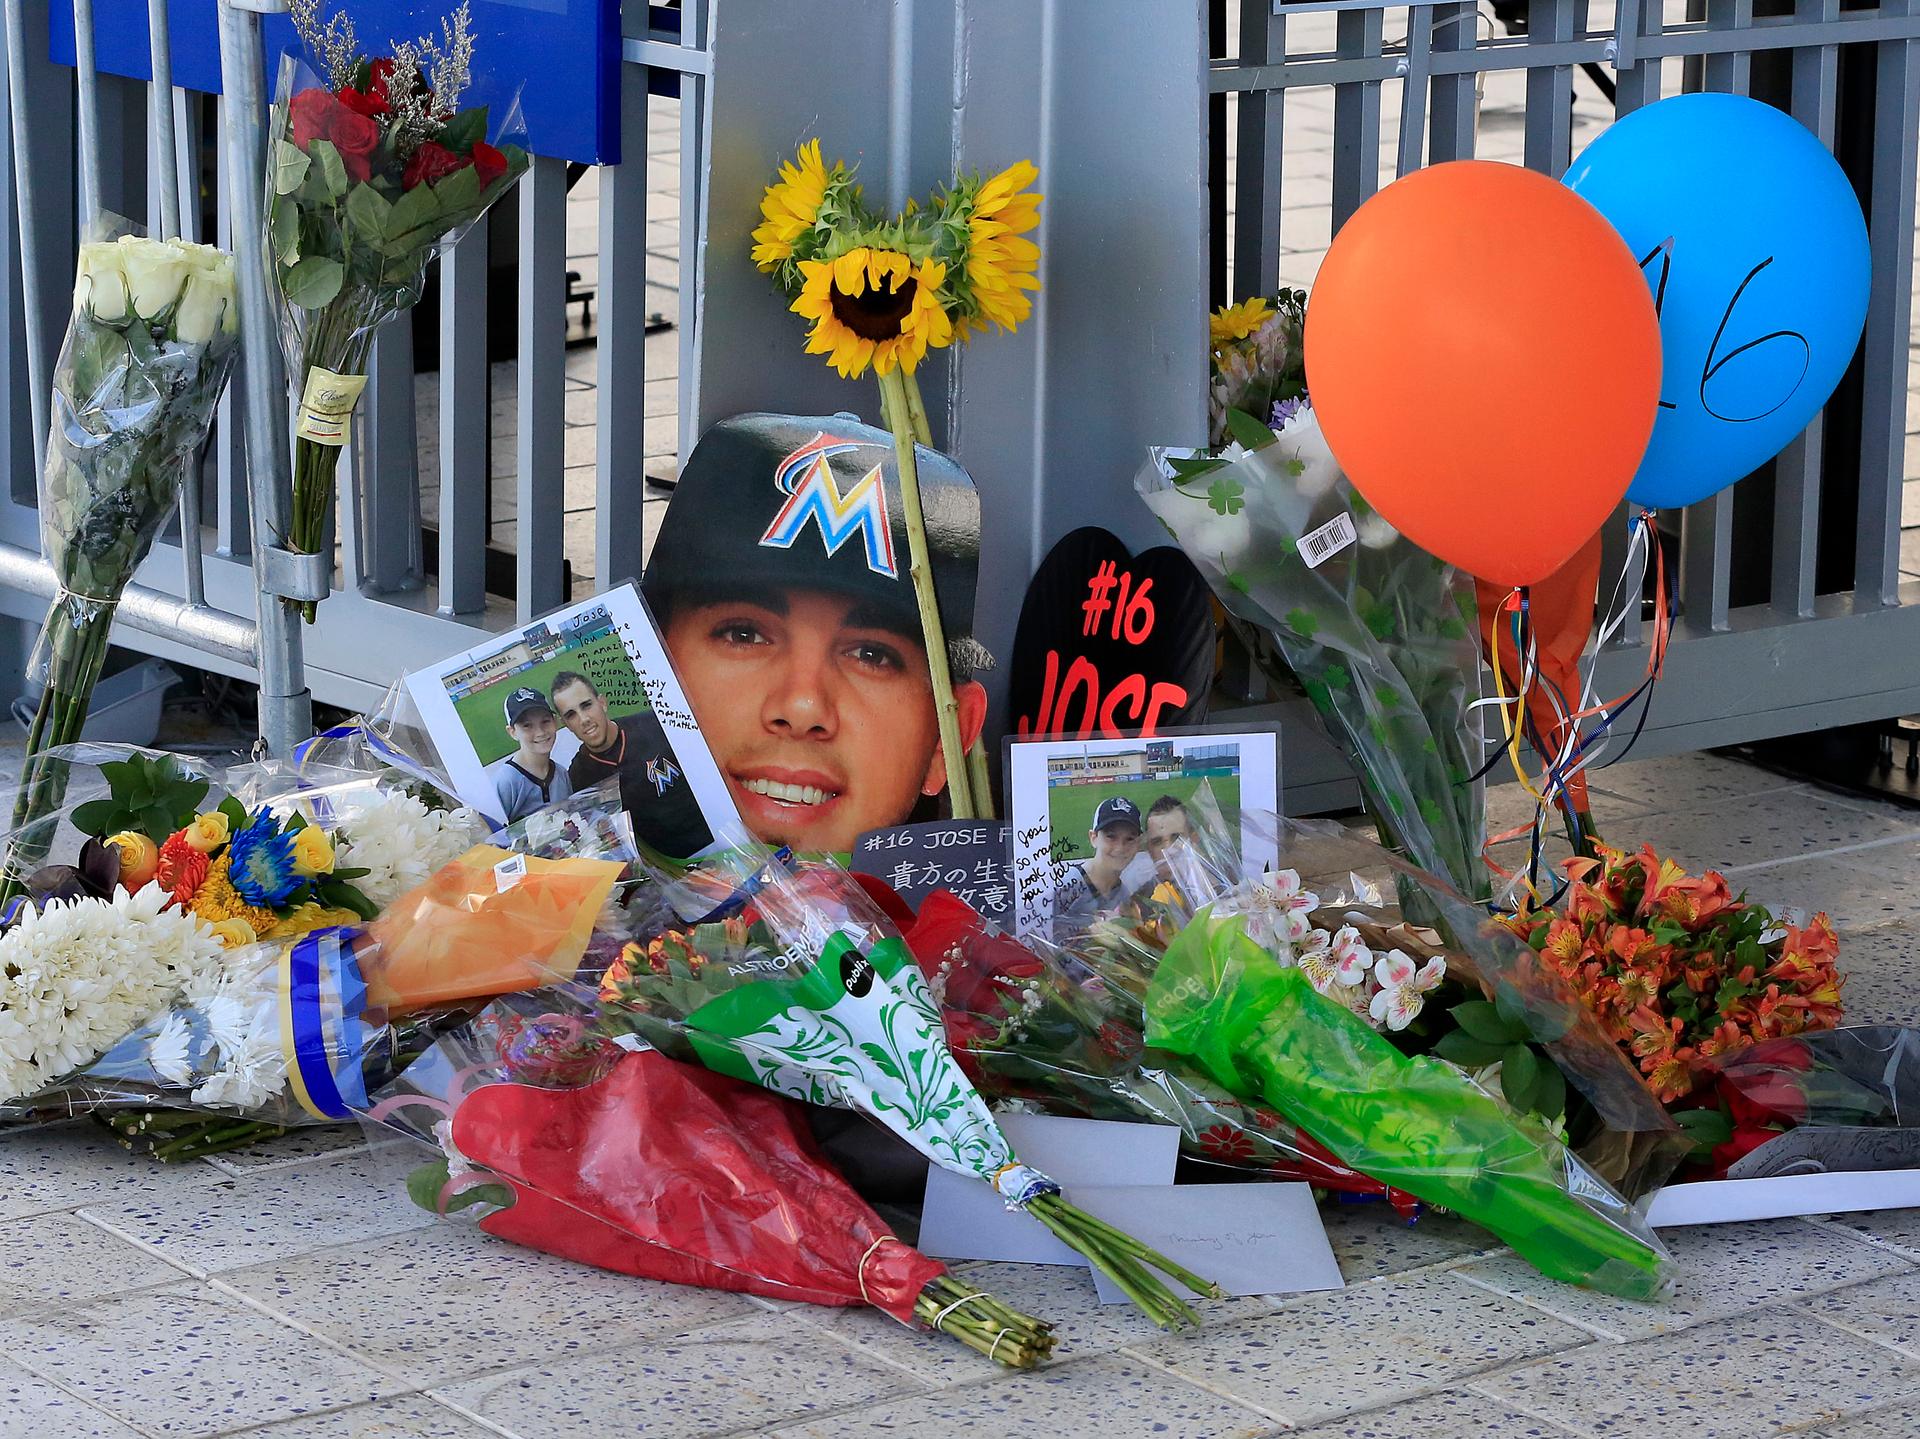 A memorial of flowers and photos are placed outside a gate at Marlins Park in honor of Miami Marlins starting pitcher Jose Fernandez who was killed in a boating accident.